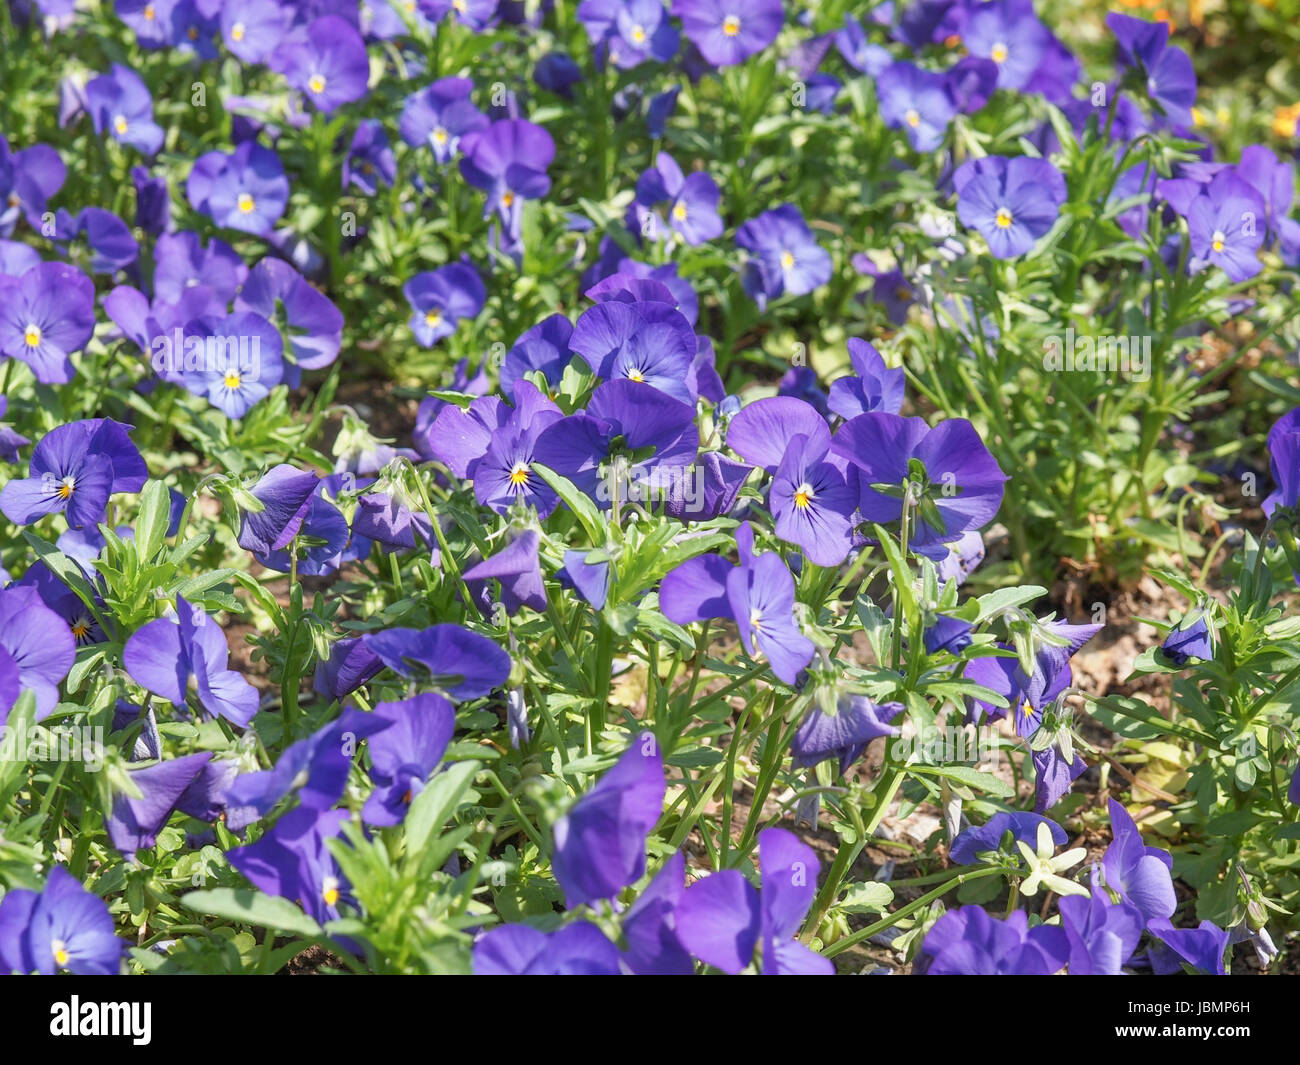 Viola flowering plant in the violet family Violaceae Stock Photo